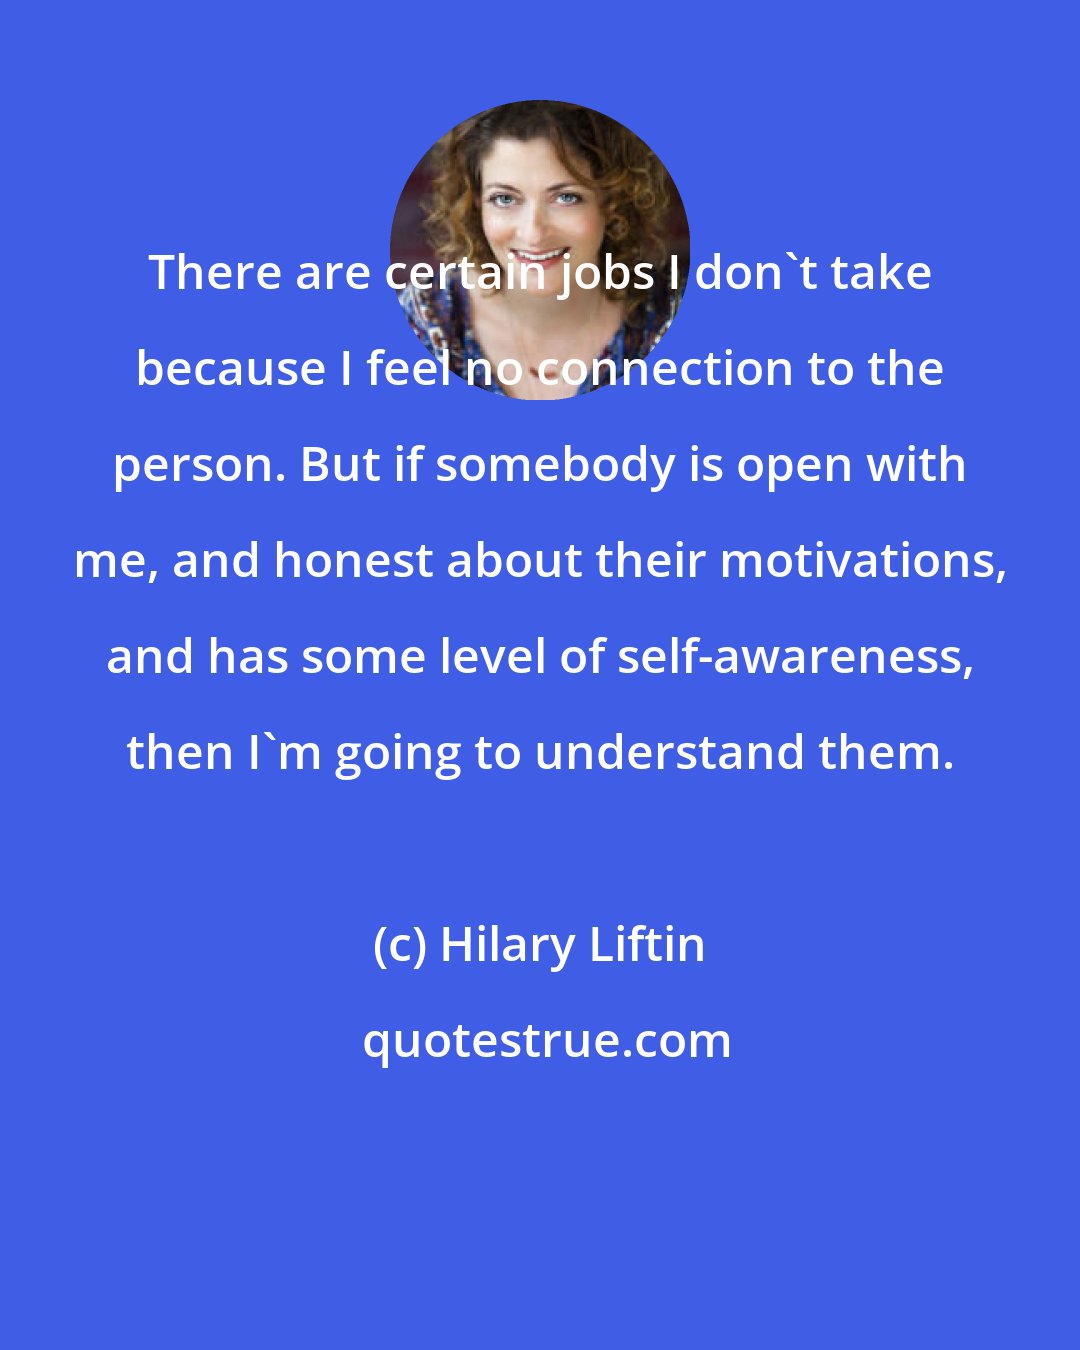 Hilary Liftin: There are certain jobs I don't take because I feel no connection to the person. But if somebody is open with me, and honest about their motivations, and has some level of self-awareness, then I'm going to understand them.